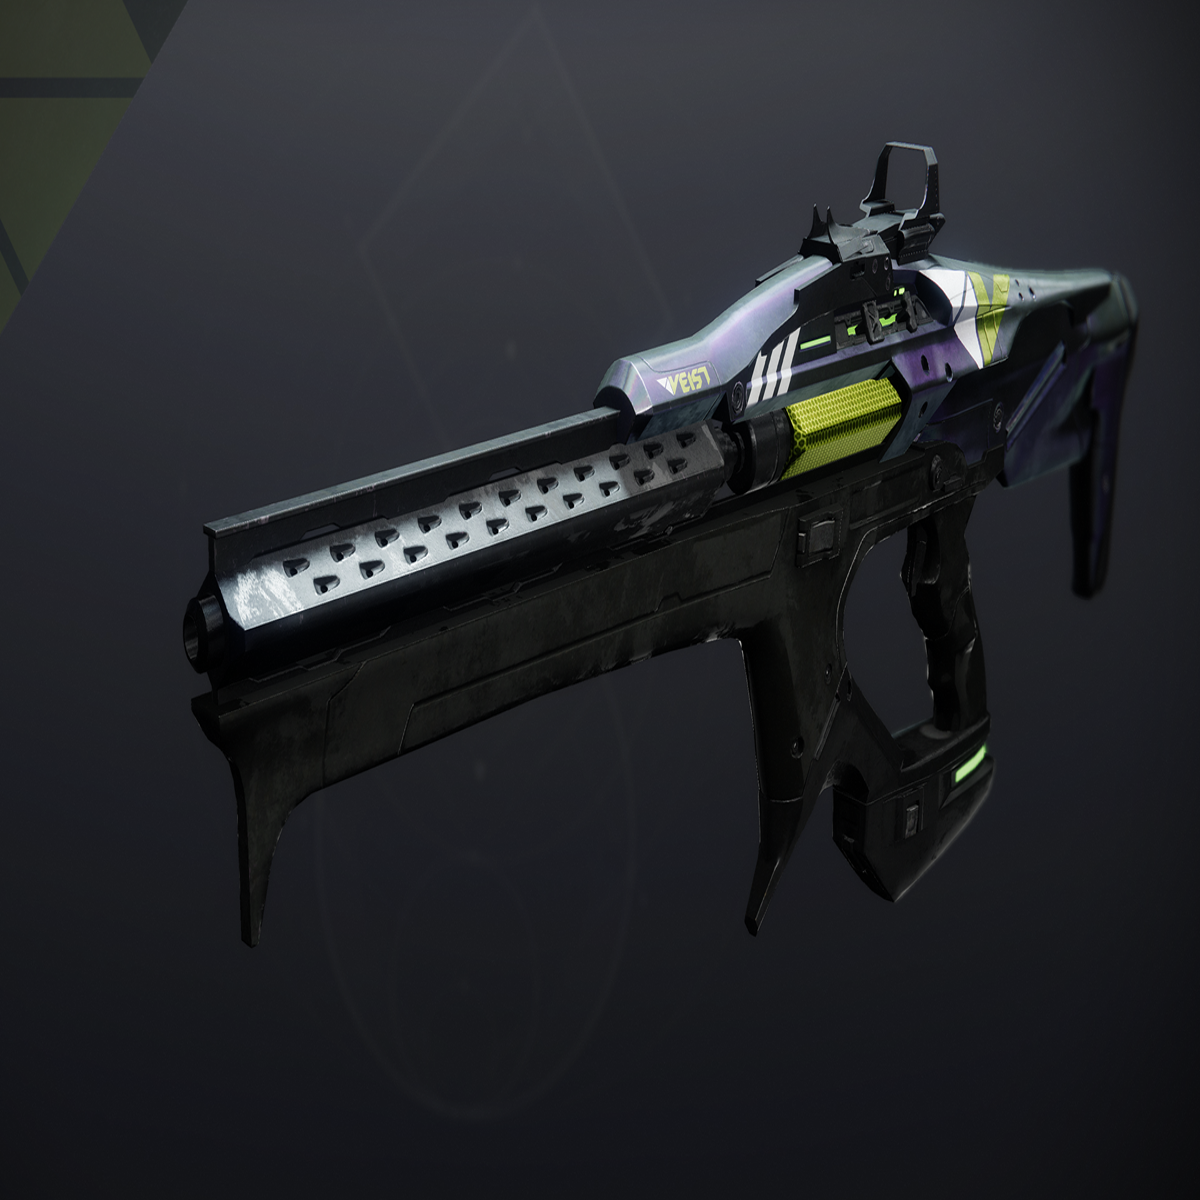 https://assetsio.gnwcdn.com/destiny_2_taipan_iso_shot.png?width=1200&height=1200&fit=crop&quality=100&format=png&enable=upscale&auto=webp